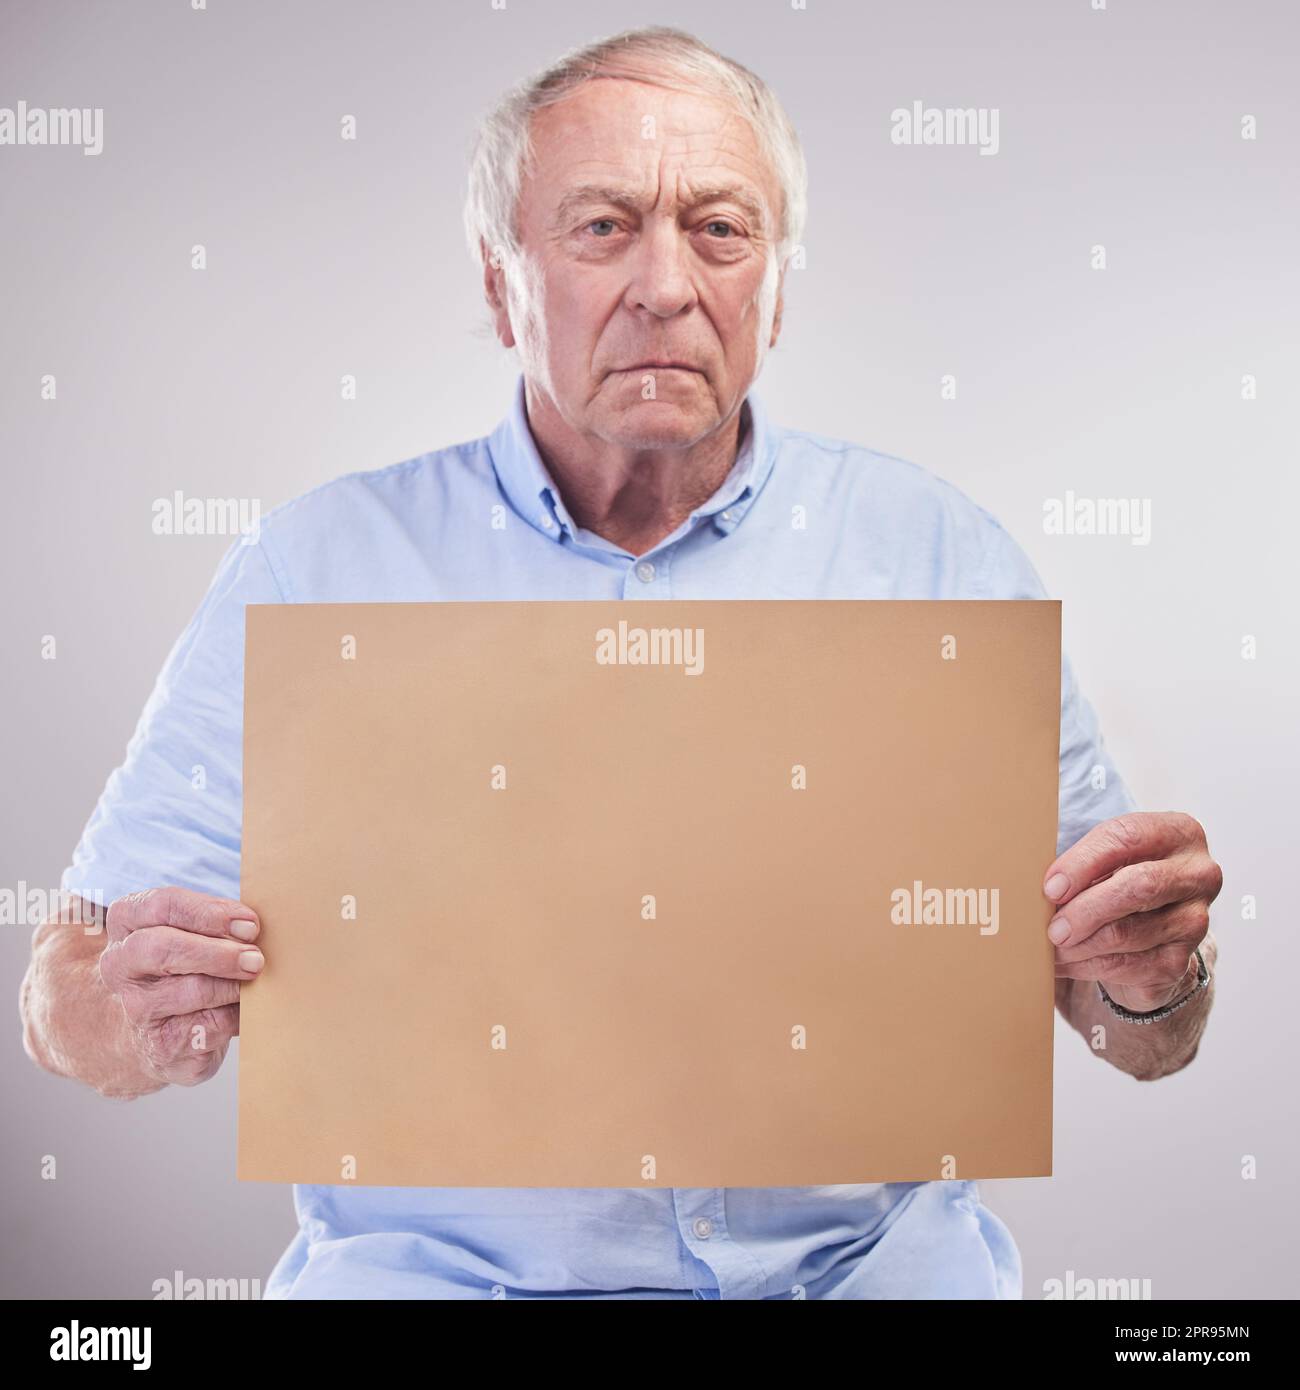 This is as serious as it gets. Studio shot of a senior man holding a blank sign against a grey background. Stock Photo